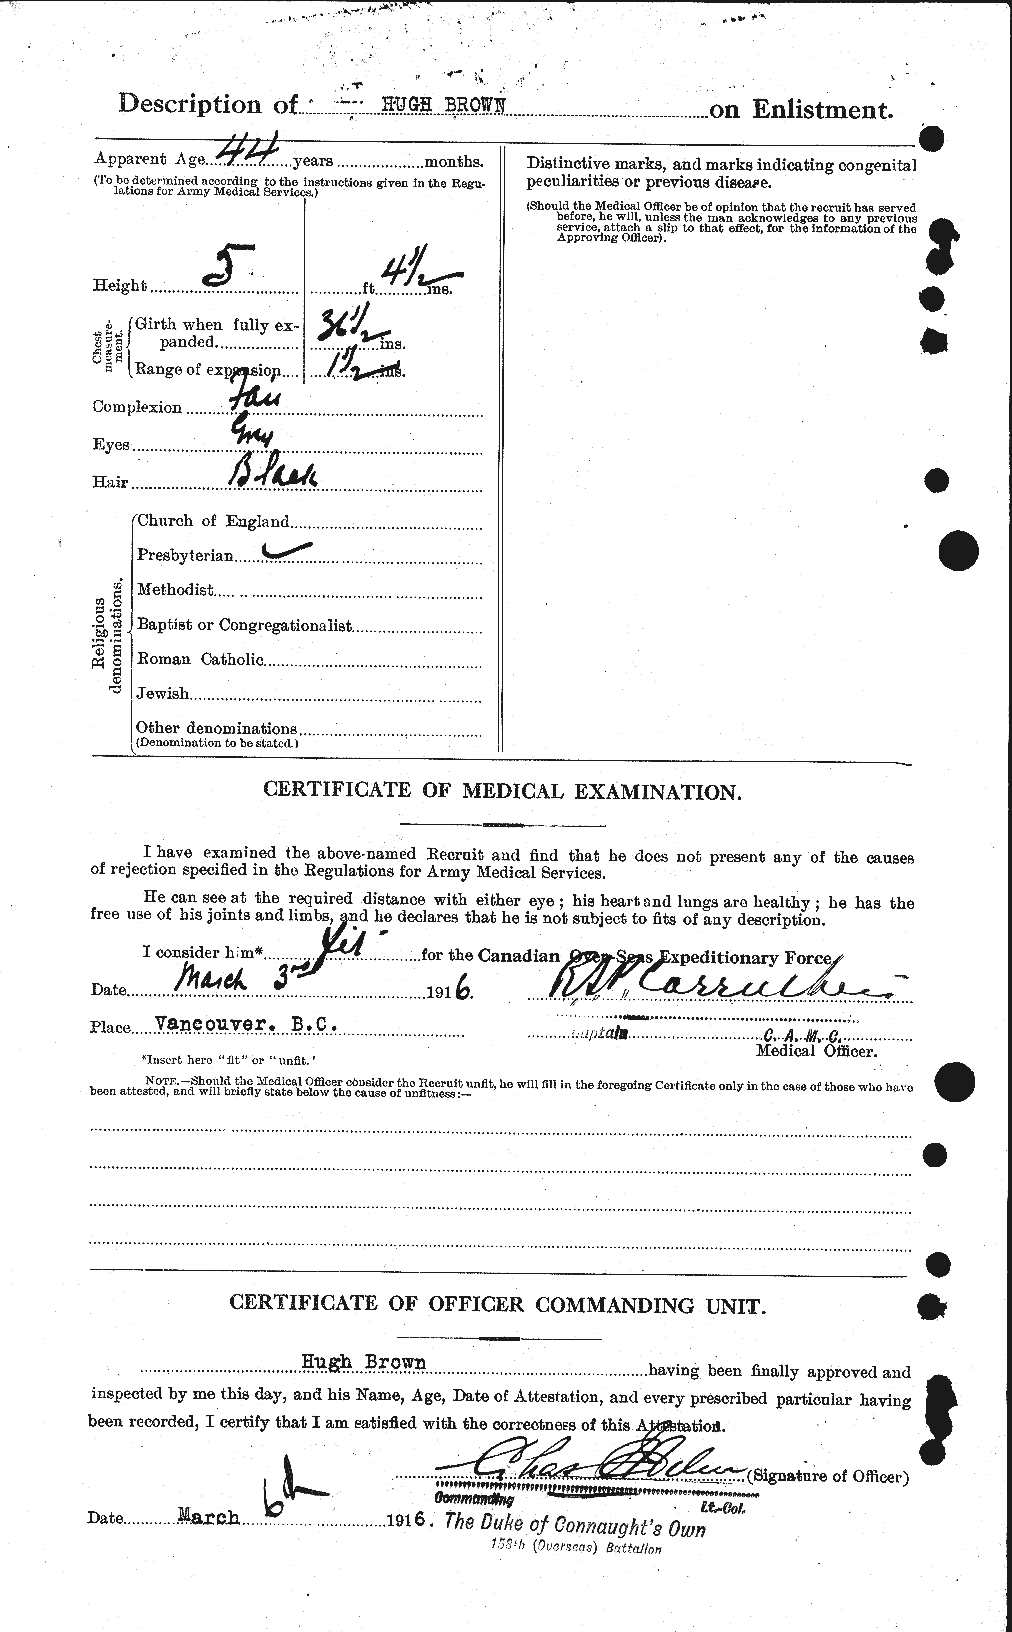 Personnel Records of the First World War - CEF 265640b